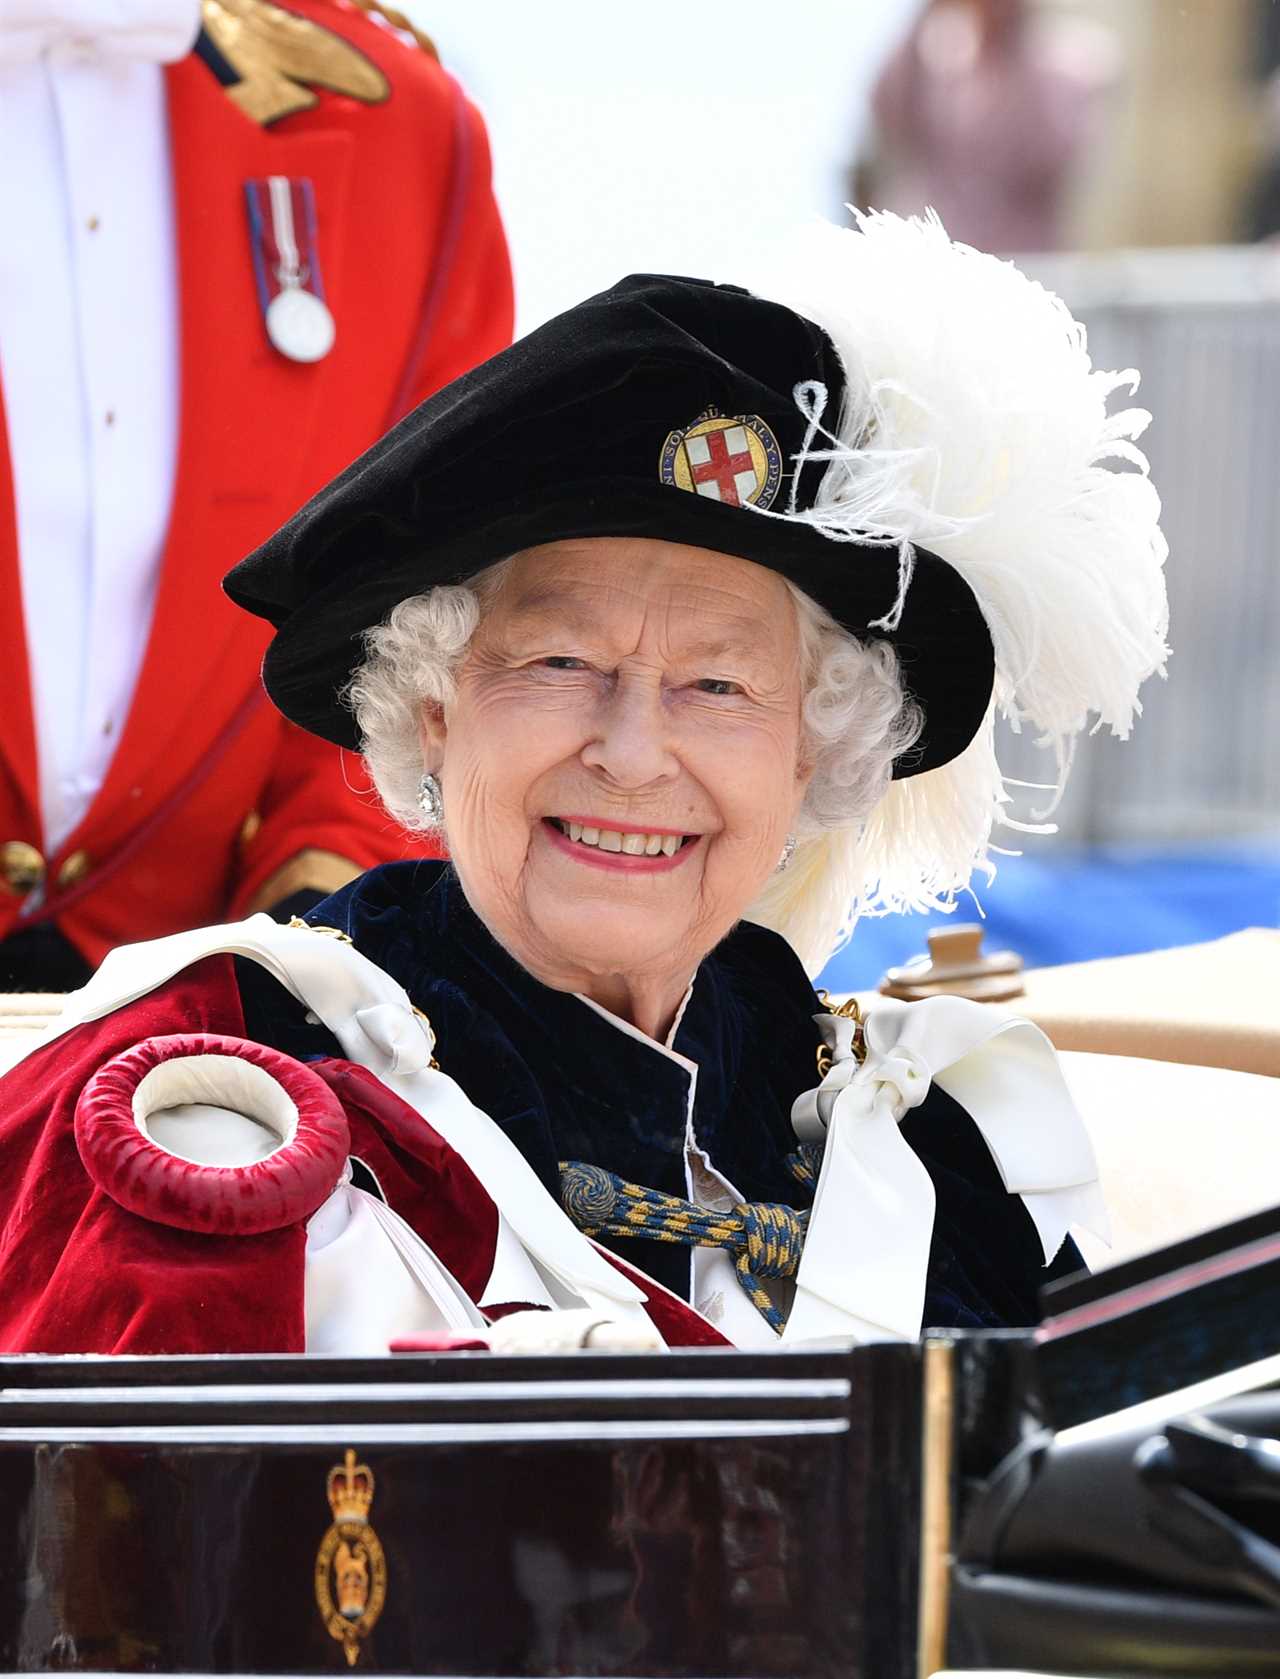 Live queue tracker: How long is the queue to see the Queen lying in state and where does it start?